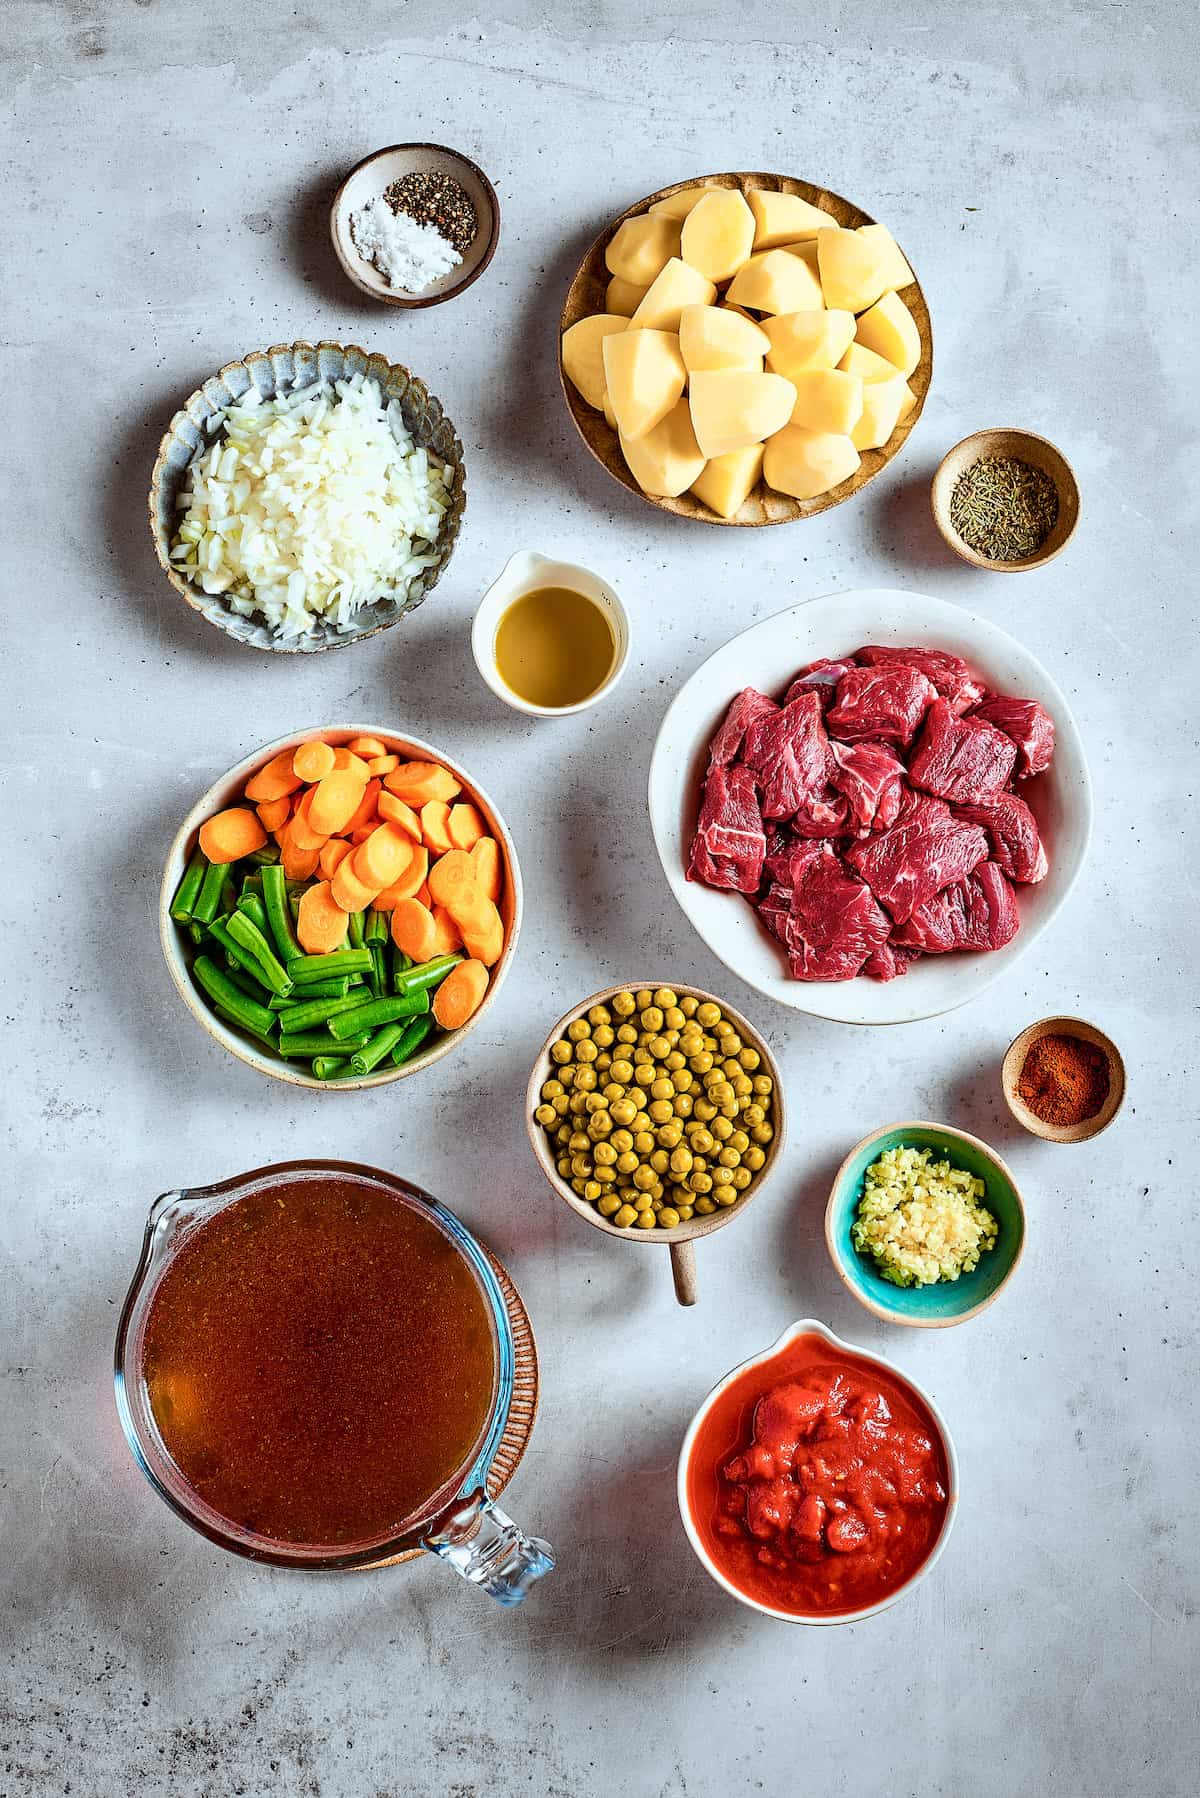 Ingredients for Mulligan stew arranged on a table.